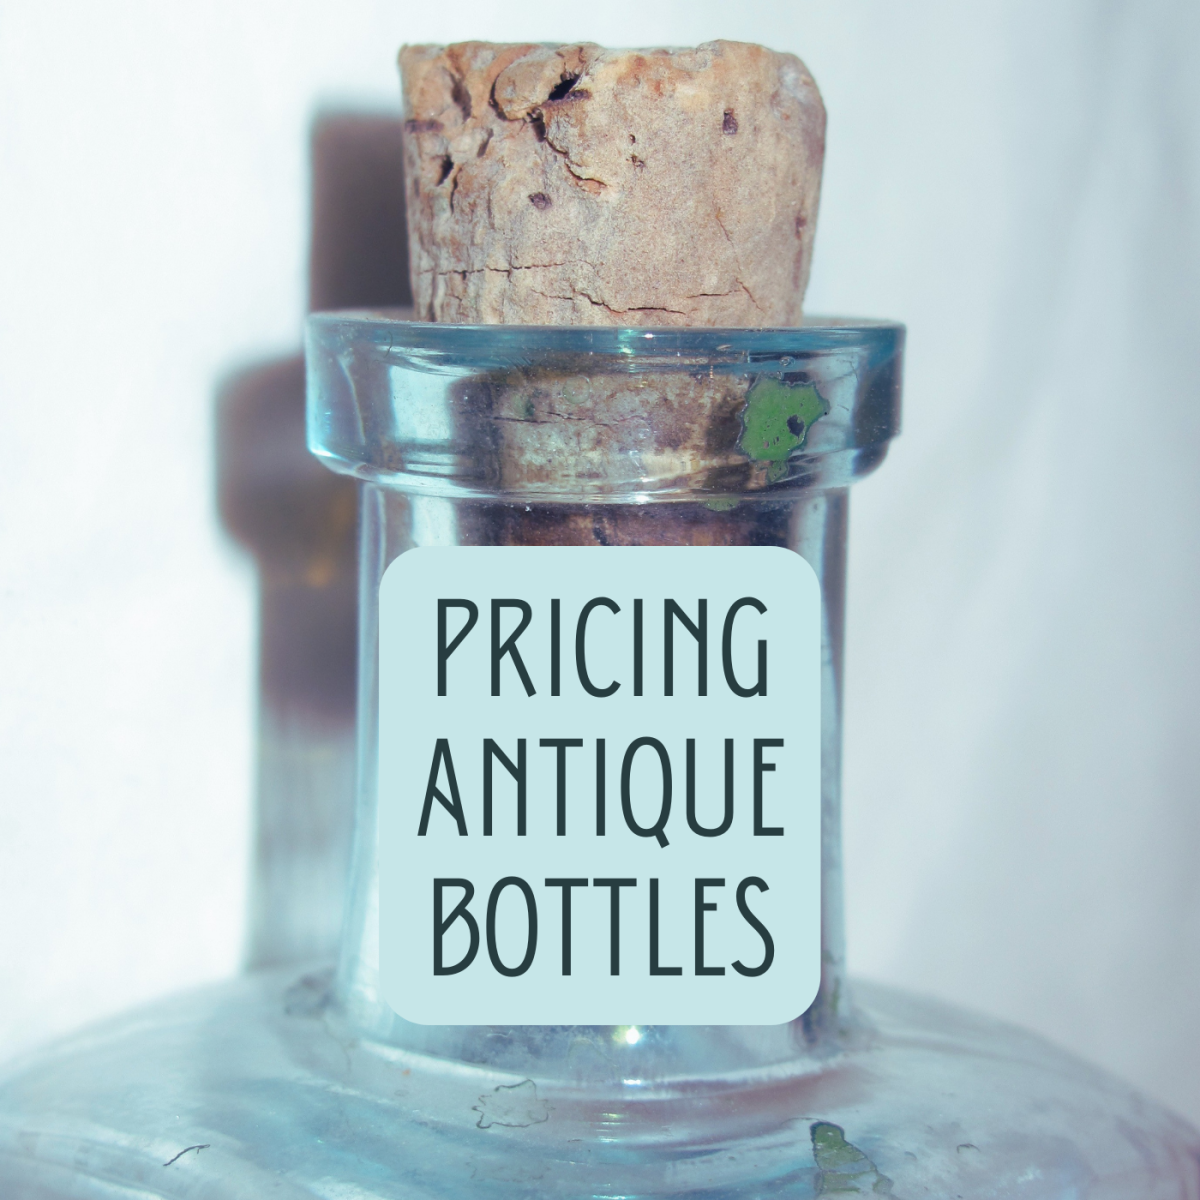 How to Find the Value of Old Antique Cork-Top Bottles